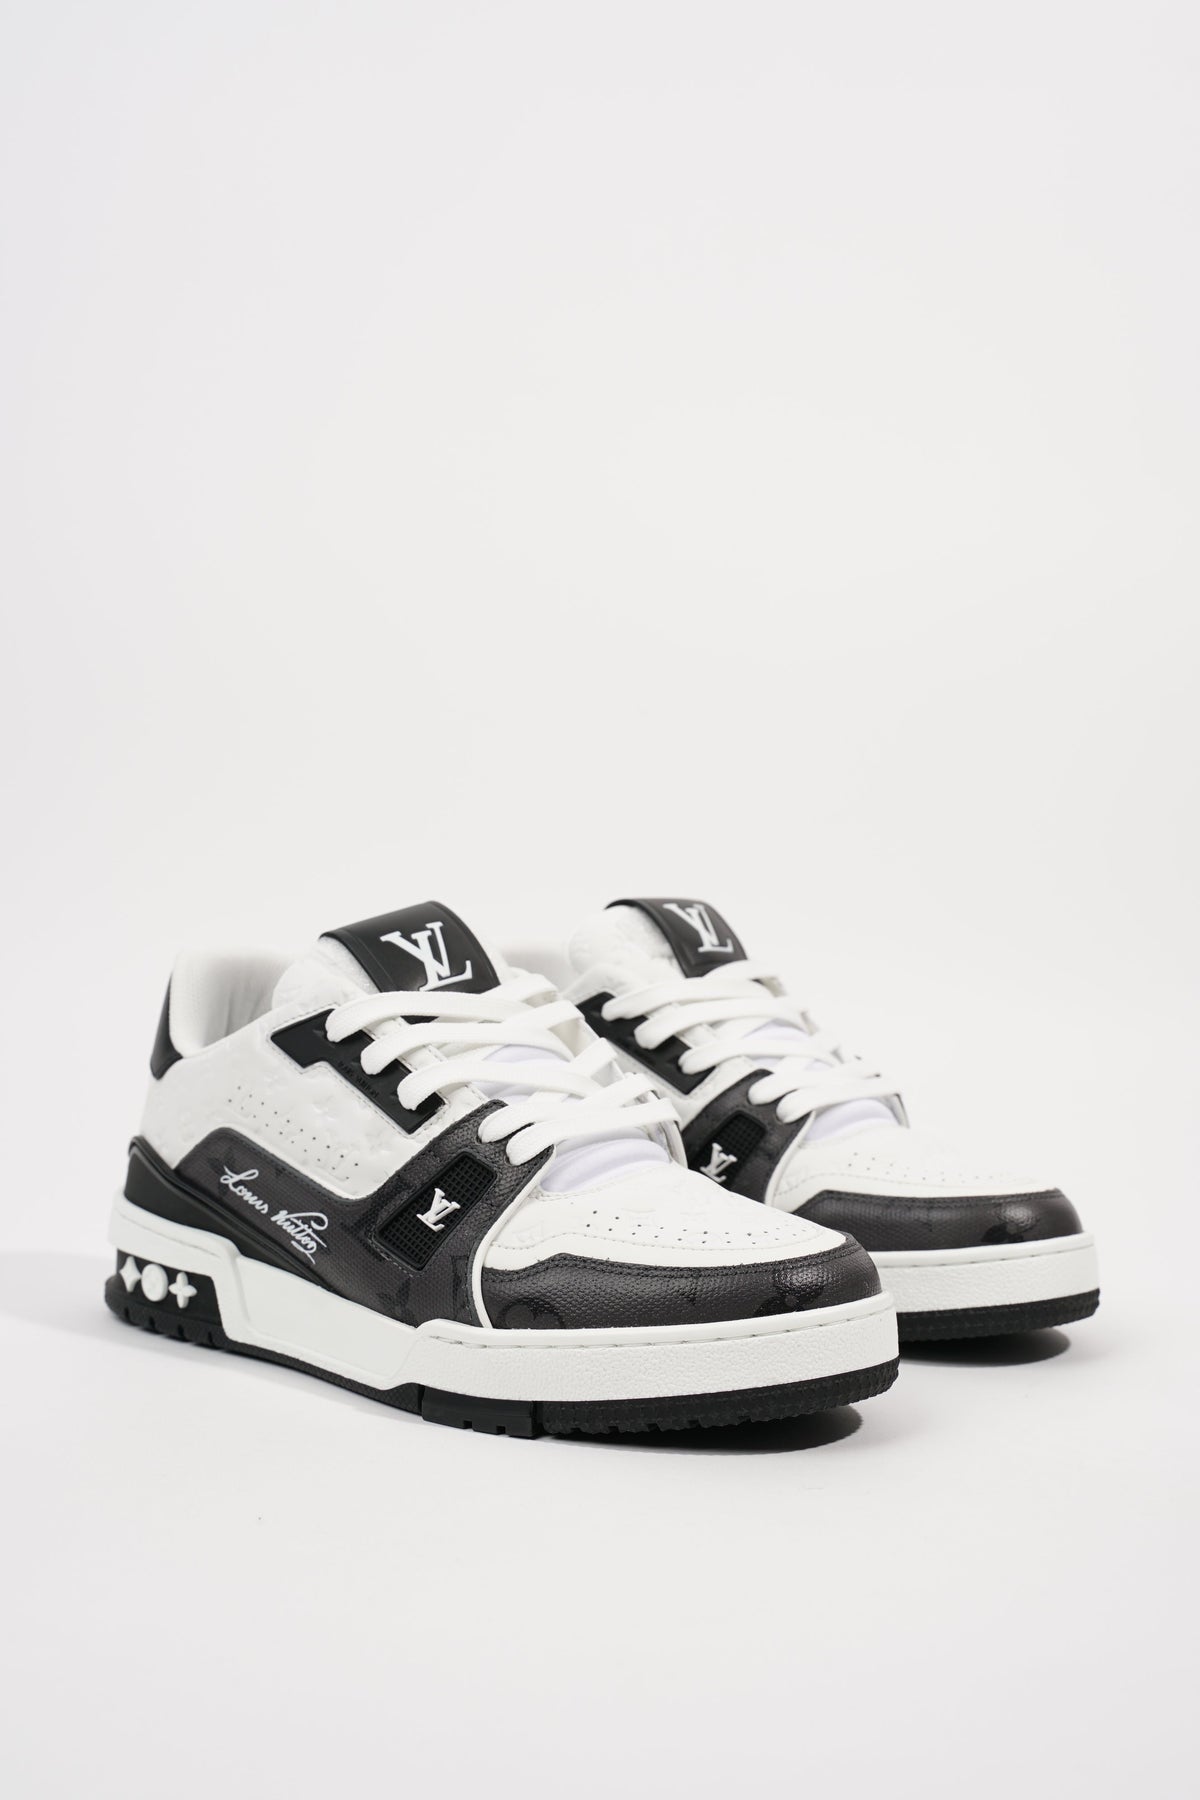 lv sneakers black and white